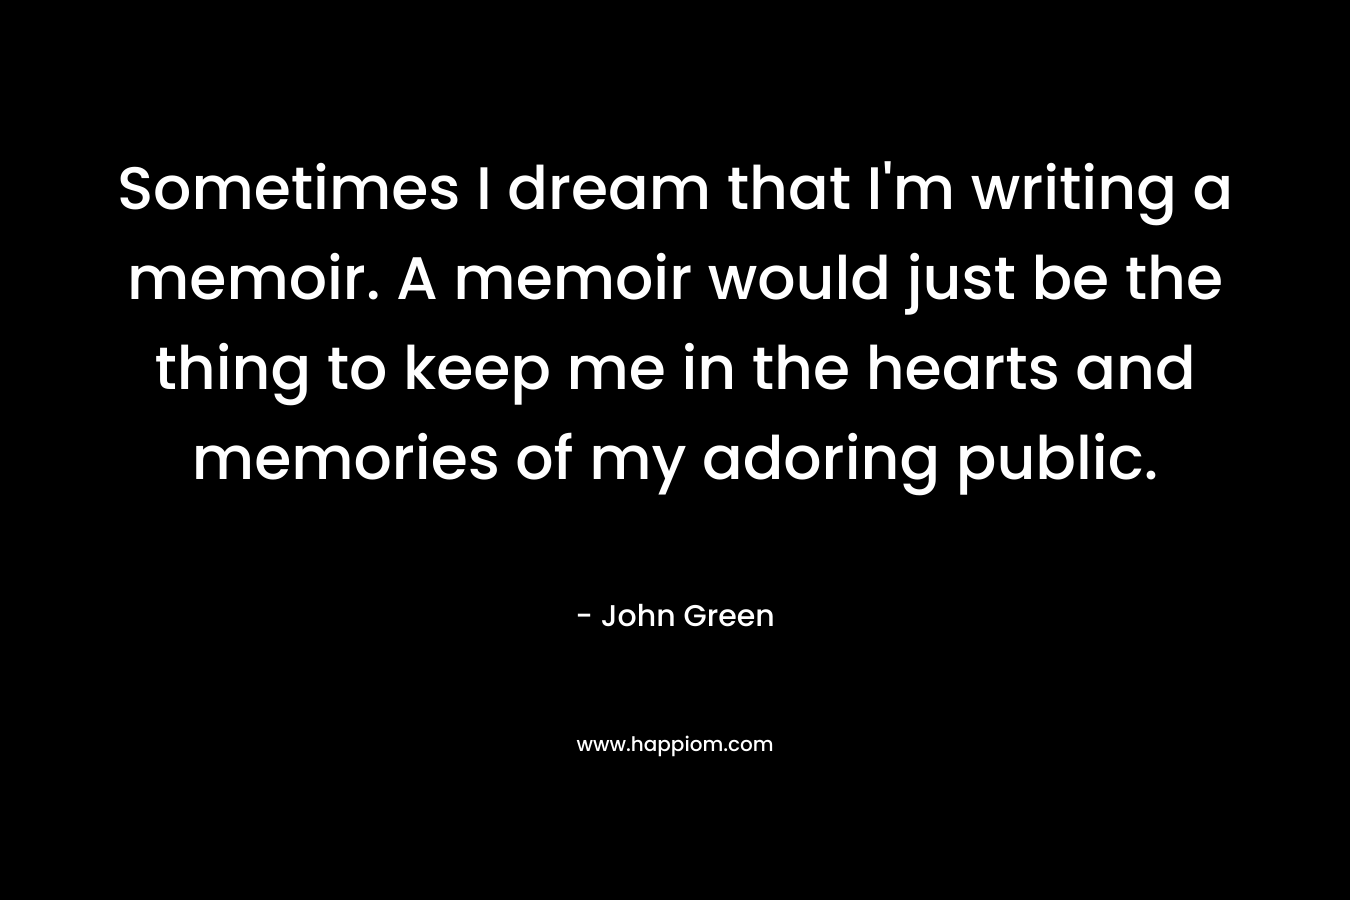 Sometimes I dream that I'm writing a memoir. A memoir would just be the thing to keep me in the hearts and memories of my adoring public.